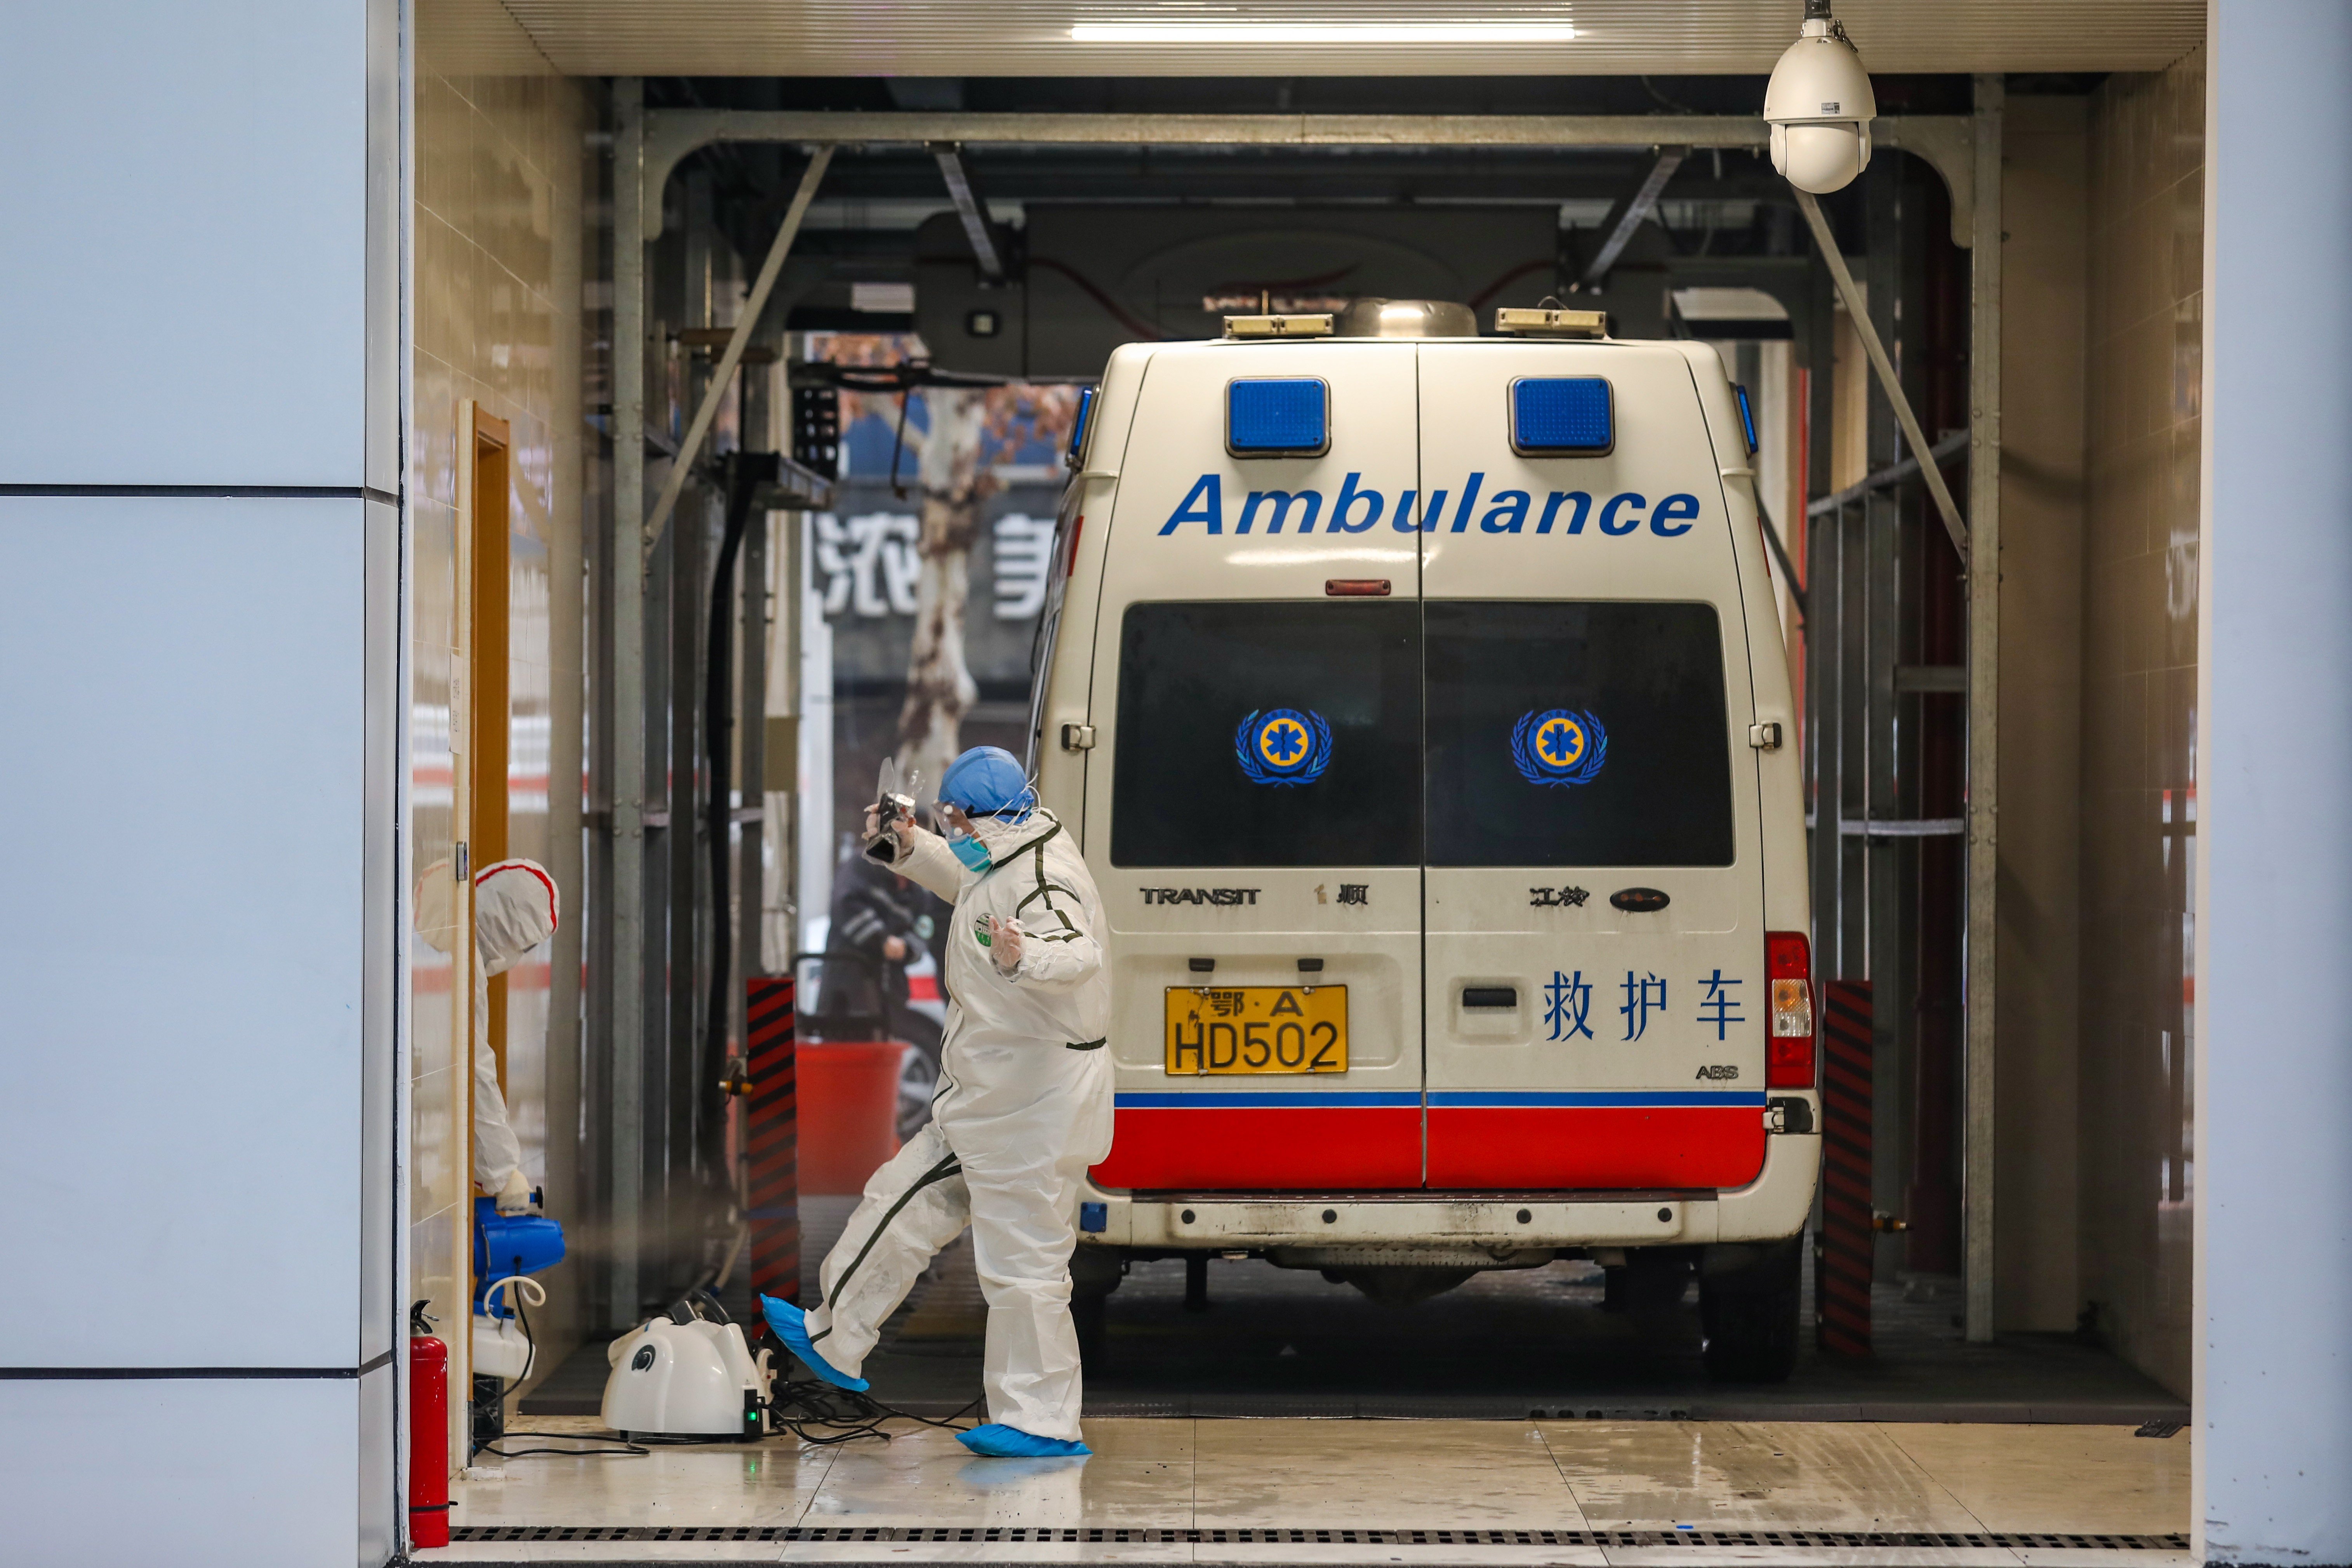 An ambulance crew and their vehicle undergo disinfection procedures in the coronavirus-hit city of Wuhan in central China. Photo: EPA-EFE